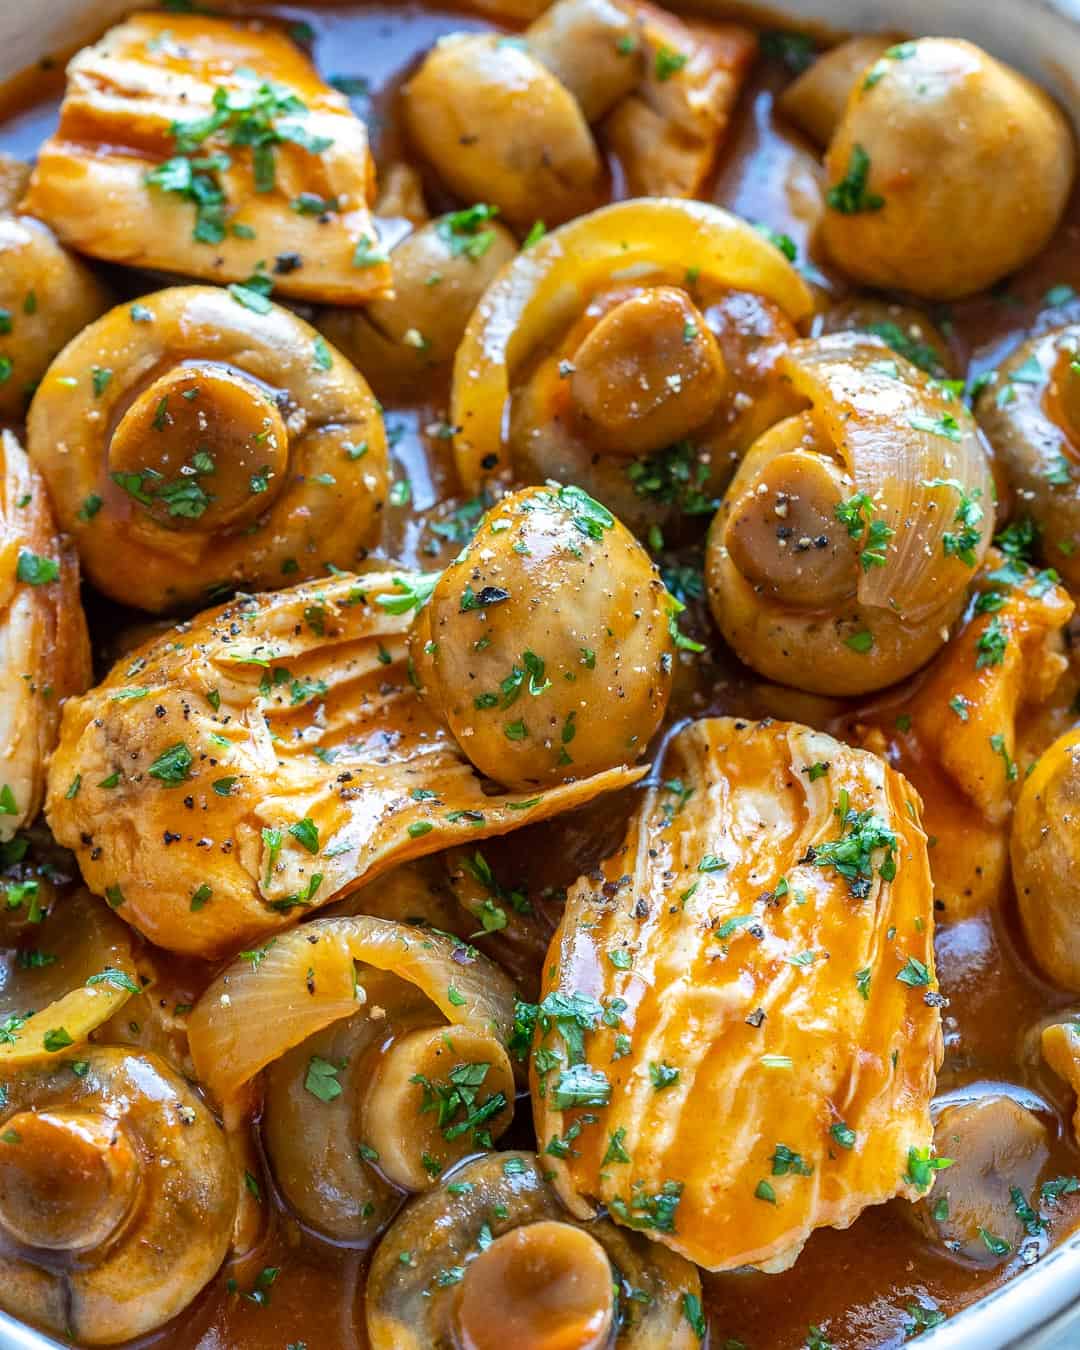 Very close up of chicken and mushrooms.